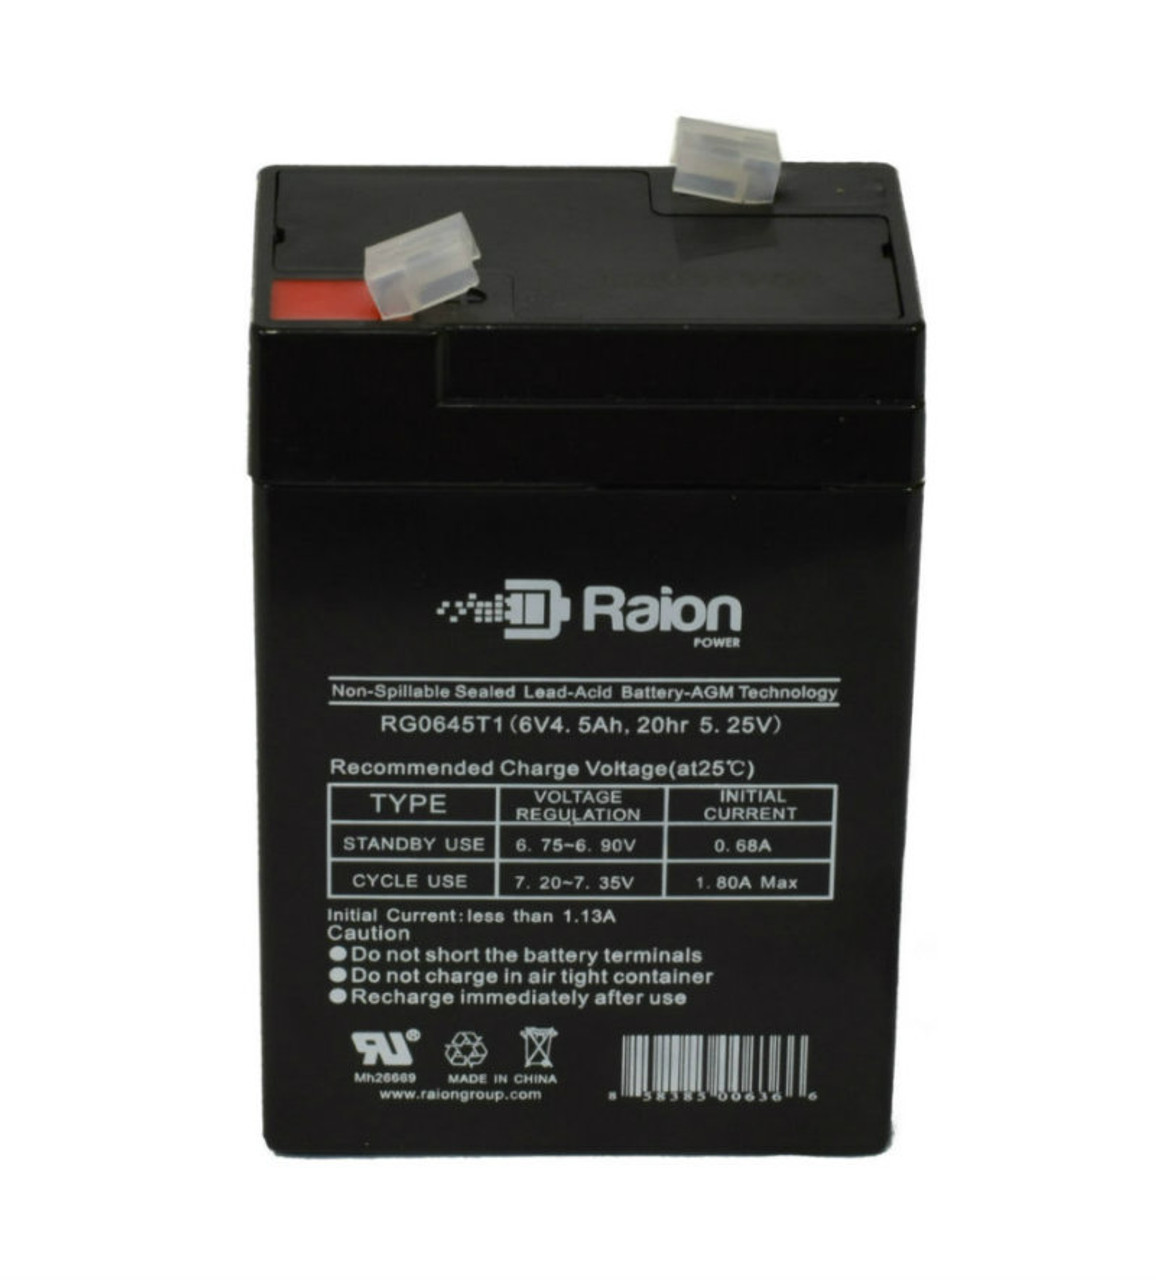 Raion Power RG0645T1 Replacement Battery Cartridge for National Power Corporation GS012P2